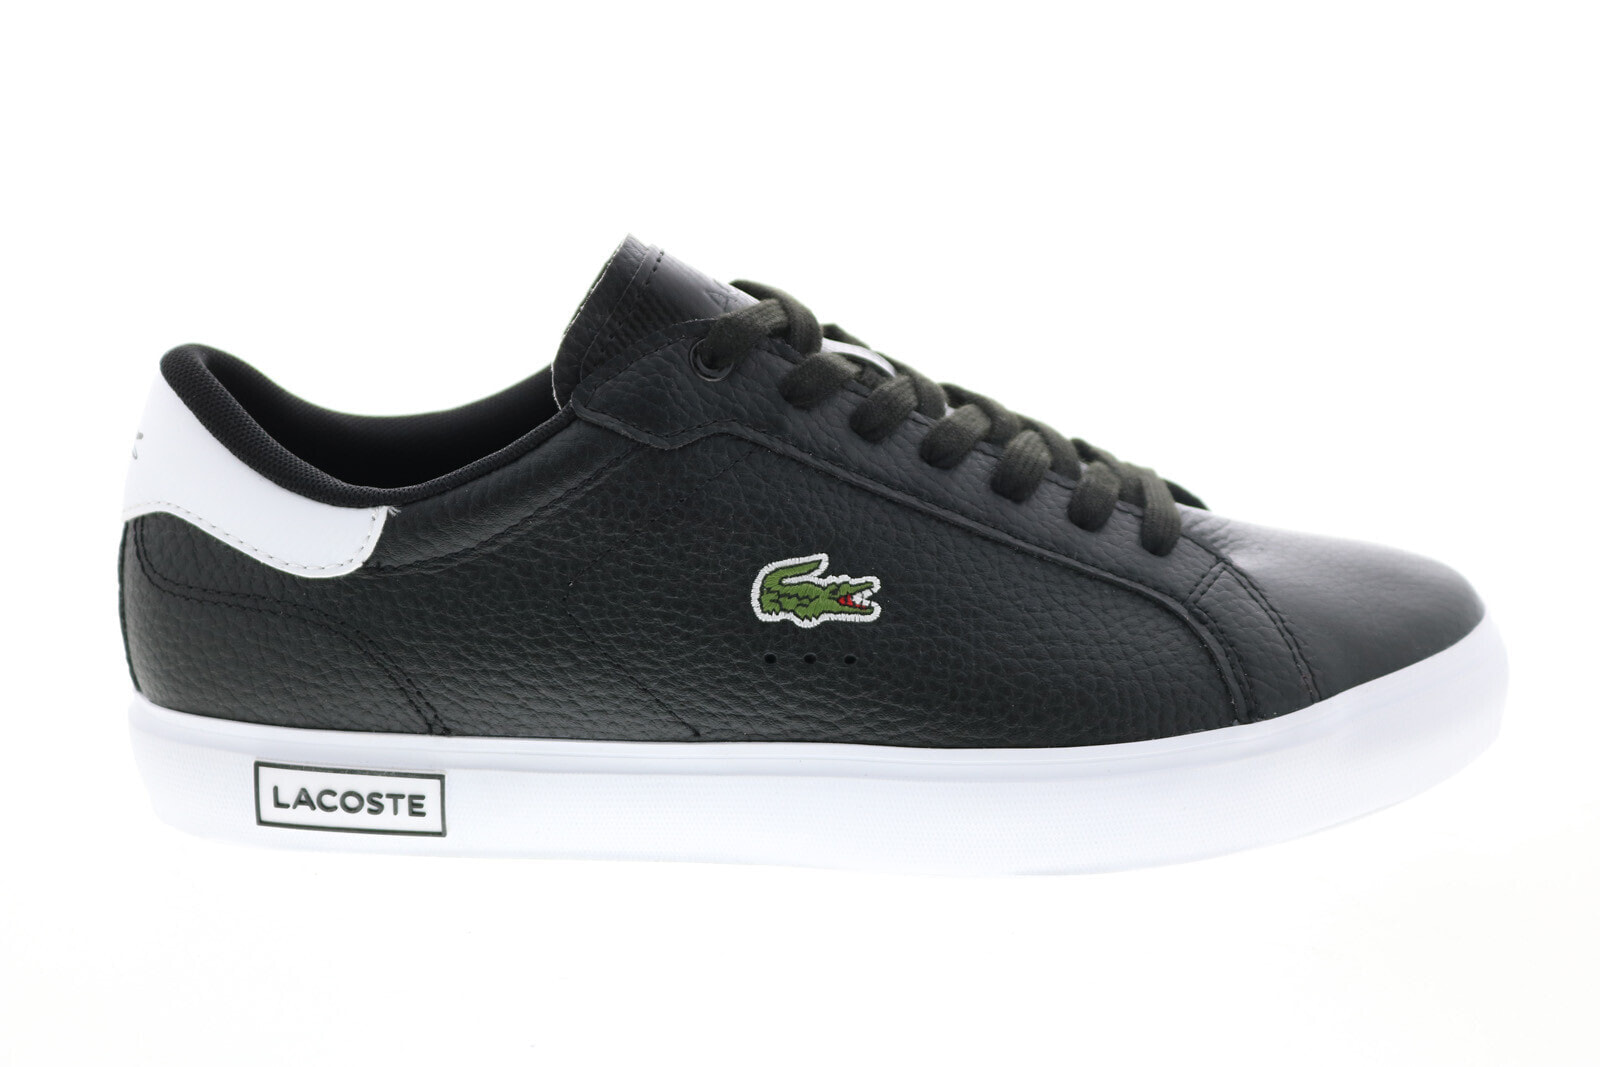 Lacoste Powercourt 0721 2 Mens Black Leather Lifestyle Sneakers Shoes